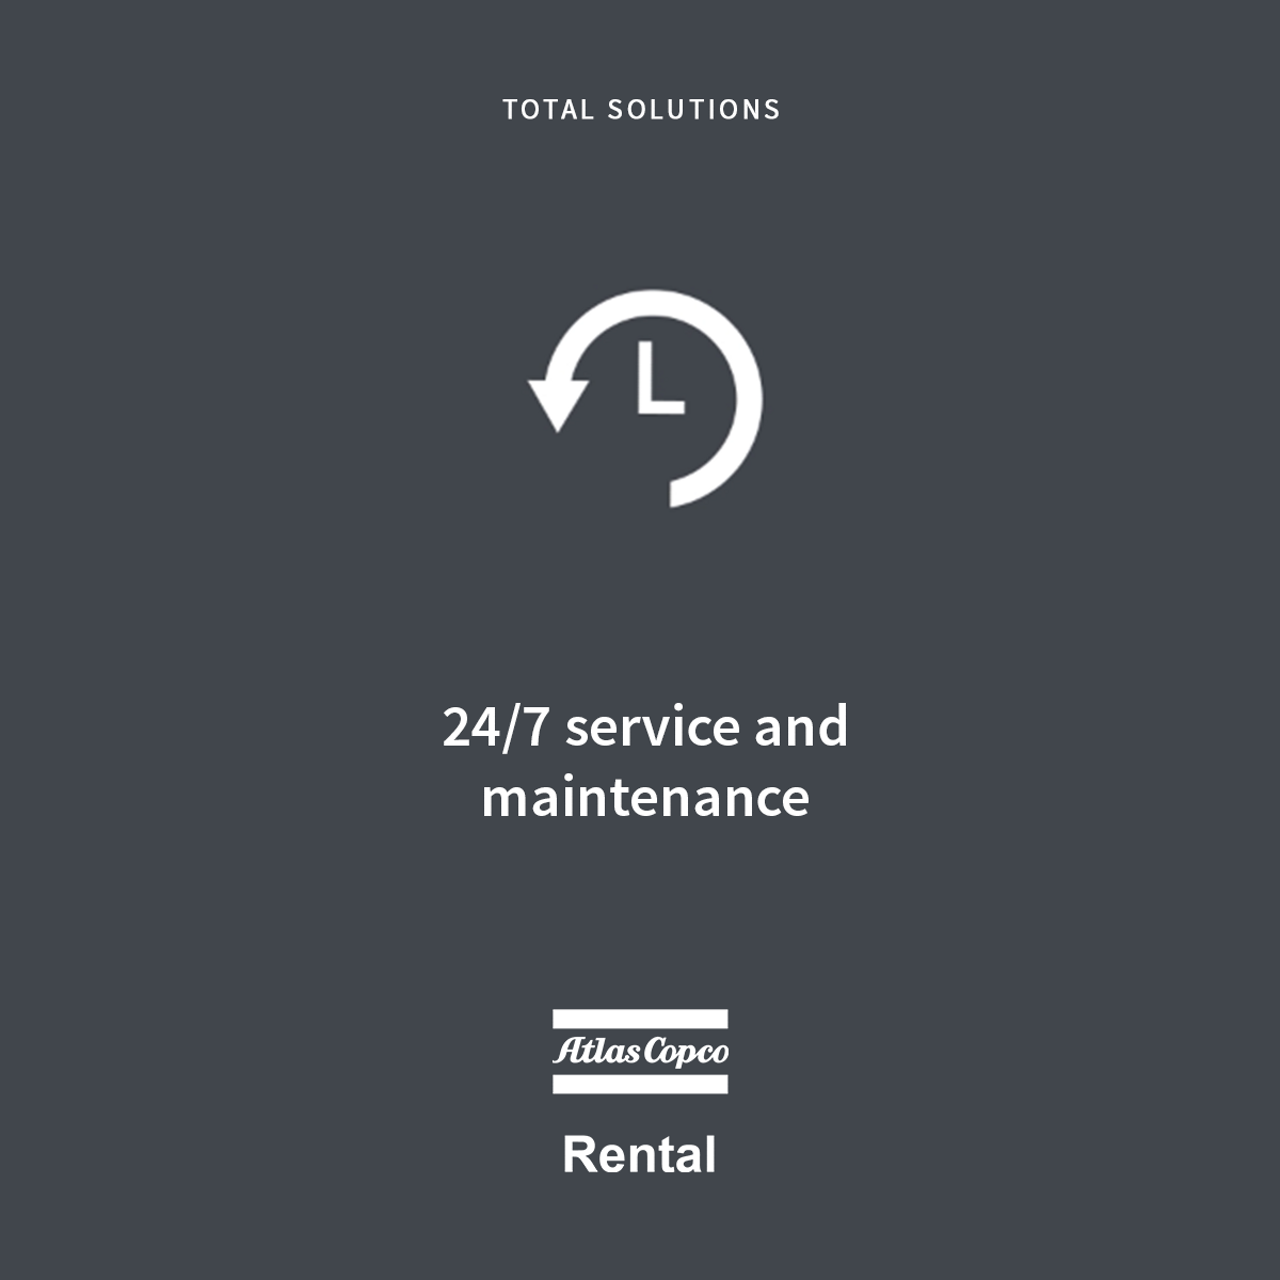 Rental Total Solution - 24 by 7 service and maintenance